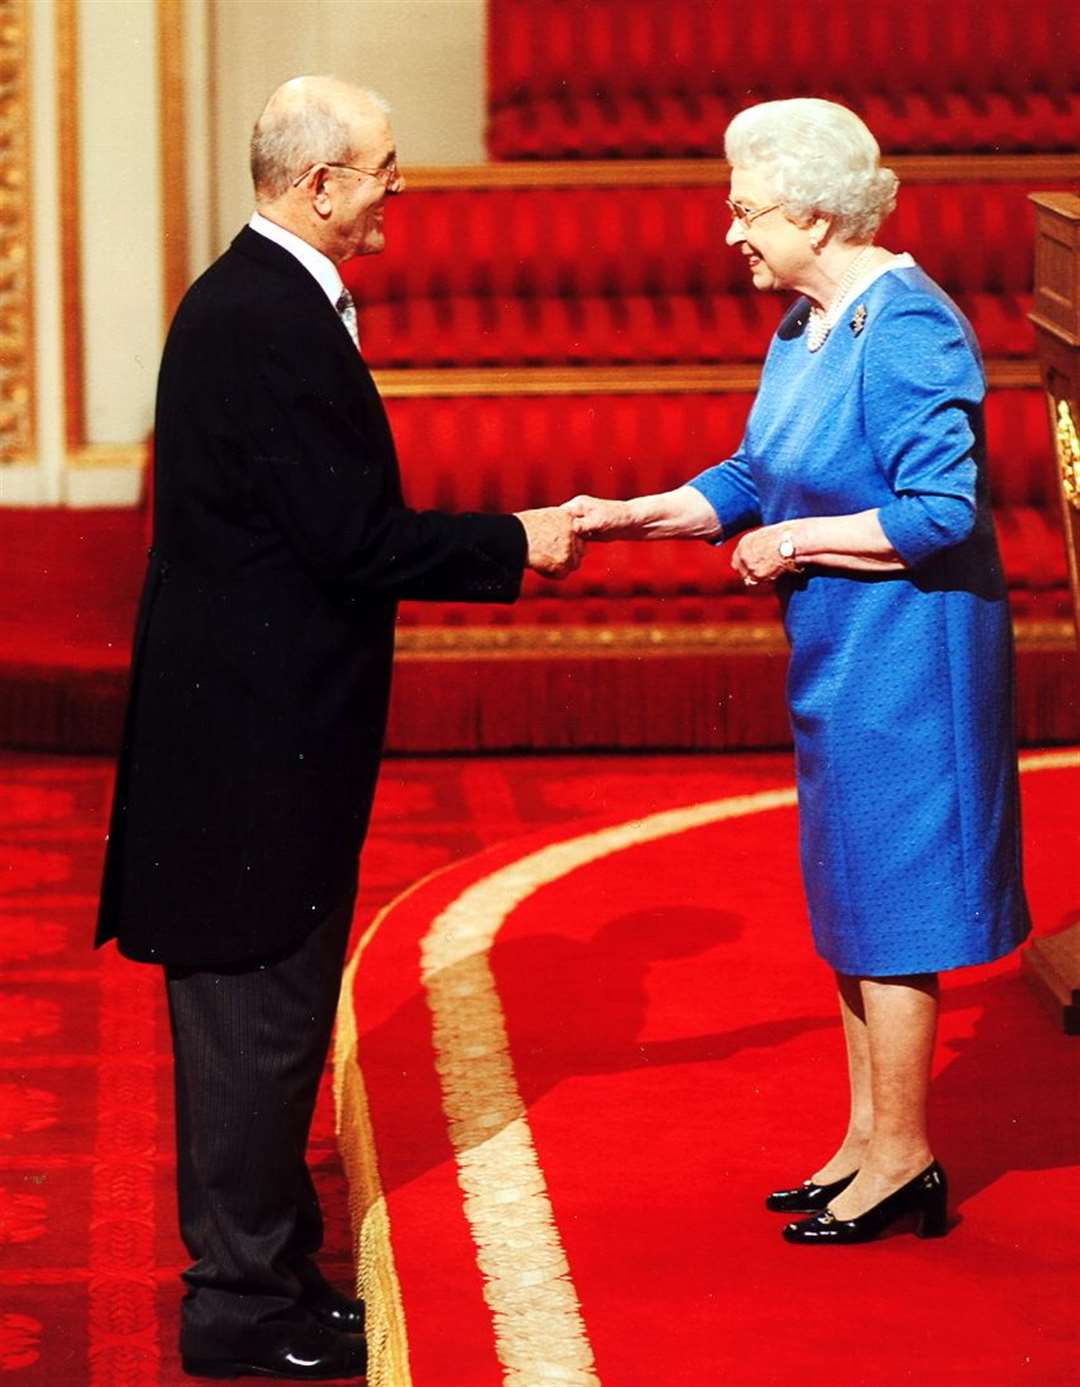 Dick Laslett receives his MBE from Her Majesty The Queen at Buckingham Palace.